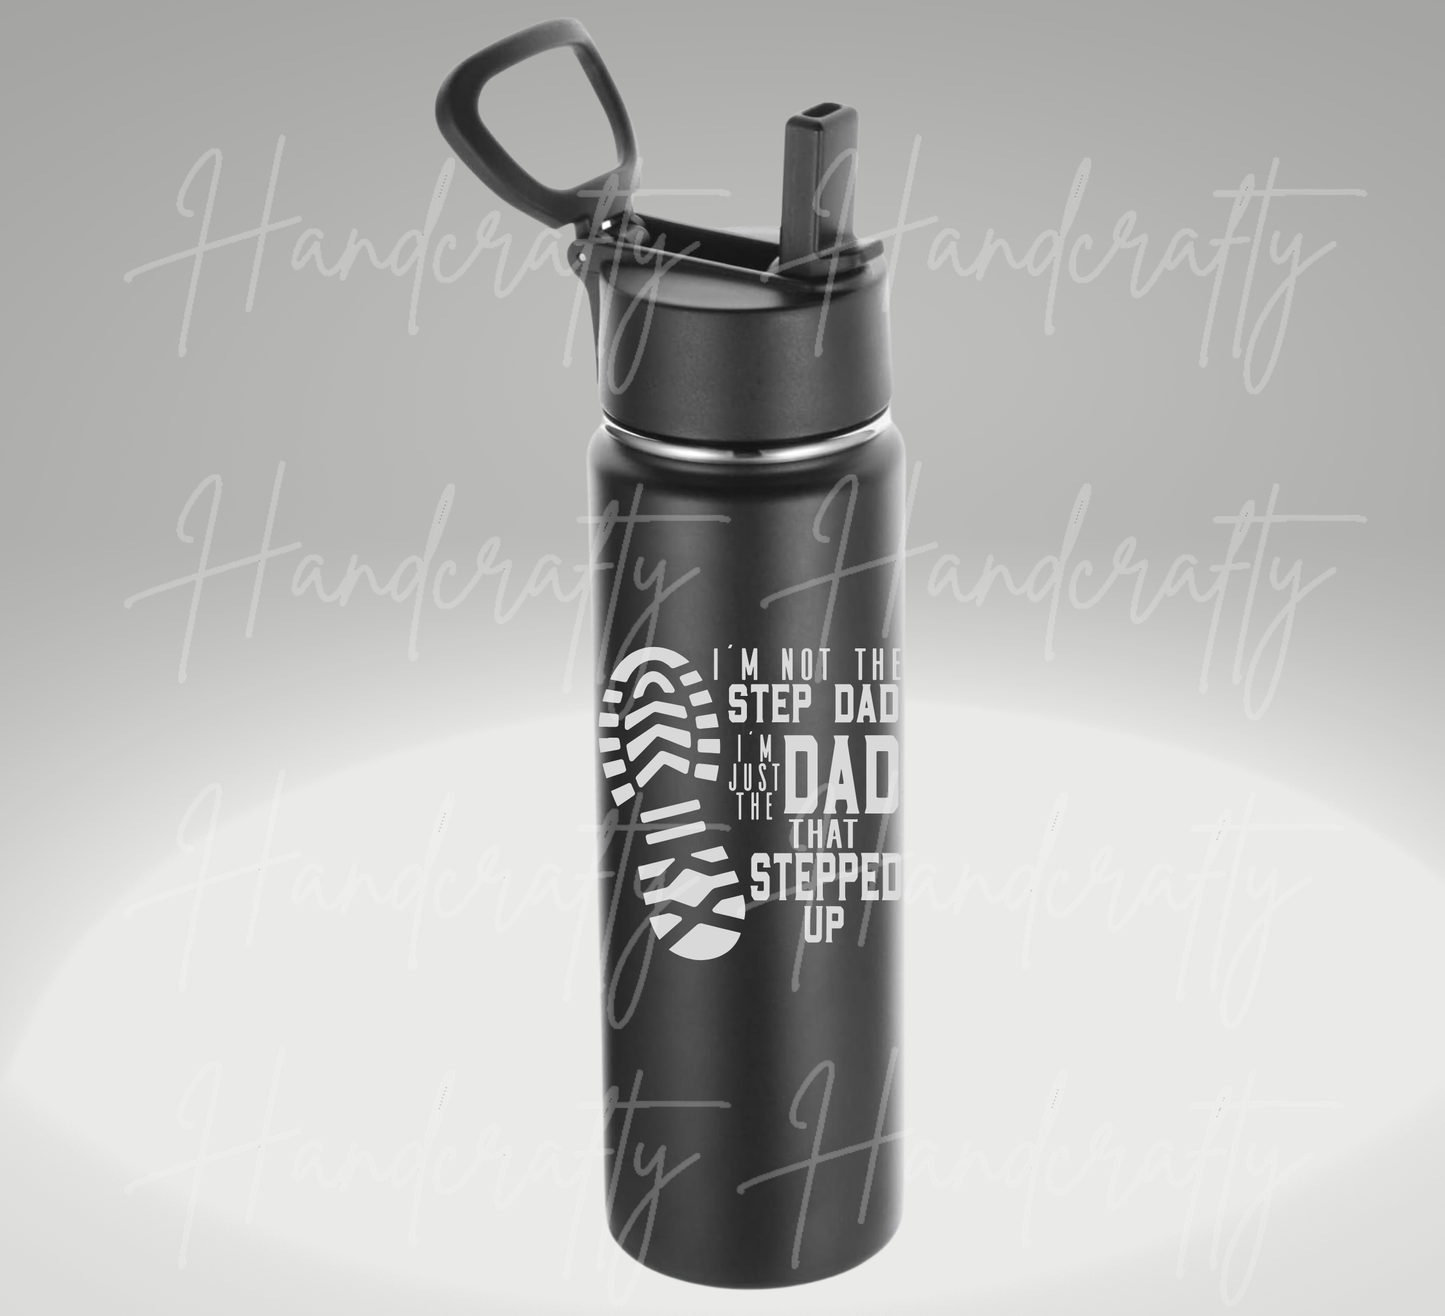 Father's Day water bottle, Father's Day gifts, Insulated water bottle for Dad, Stainless steel water bottle for Dad, Double wall water bottle for Dad, Powder coated water bottle for Dad, Double wall insulated water bottle, Vacuum insulated water bottl, Laser engraved water bottle, Durable BPA-free water bottle, Leak-proof water bottle, Spill-proof water bottle, Thermal water bottle for Dad, Best Dad water bottle, World's Best Dad water bottle, Super Dad water bottle, #1 Dad water bottle